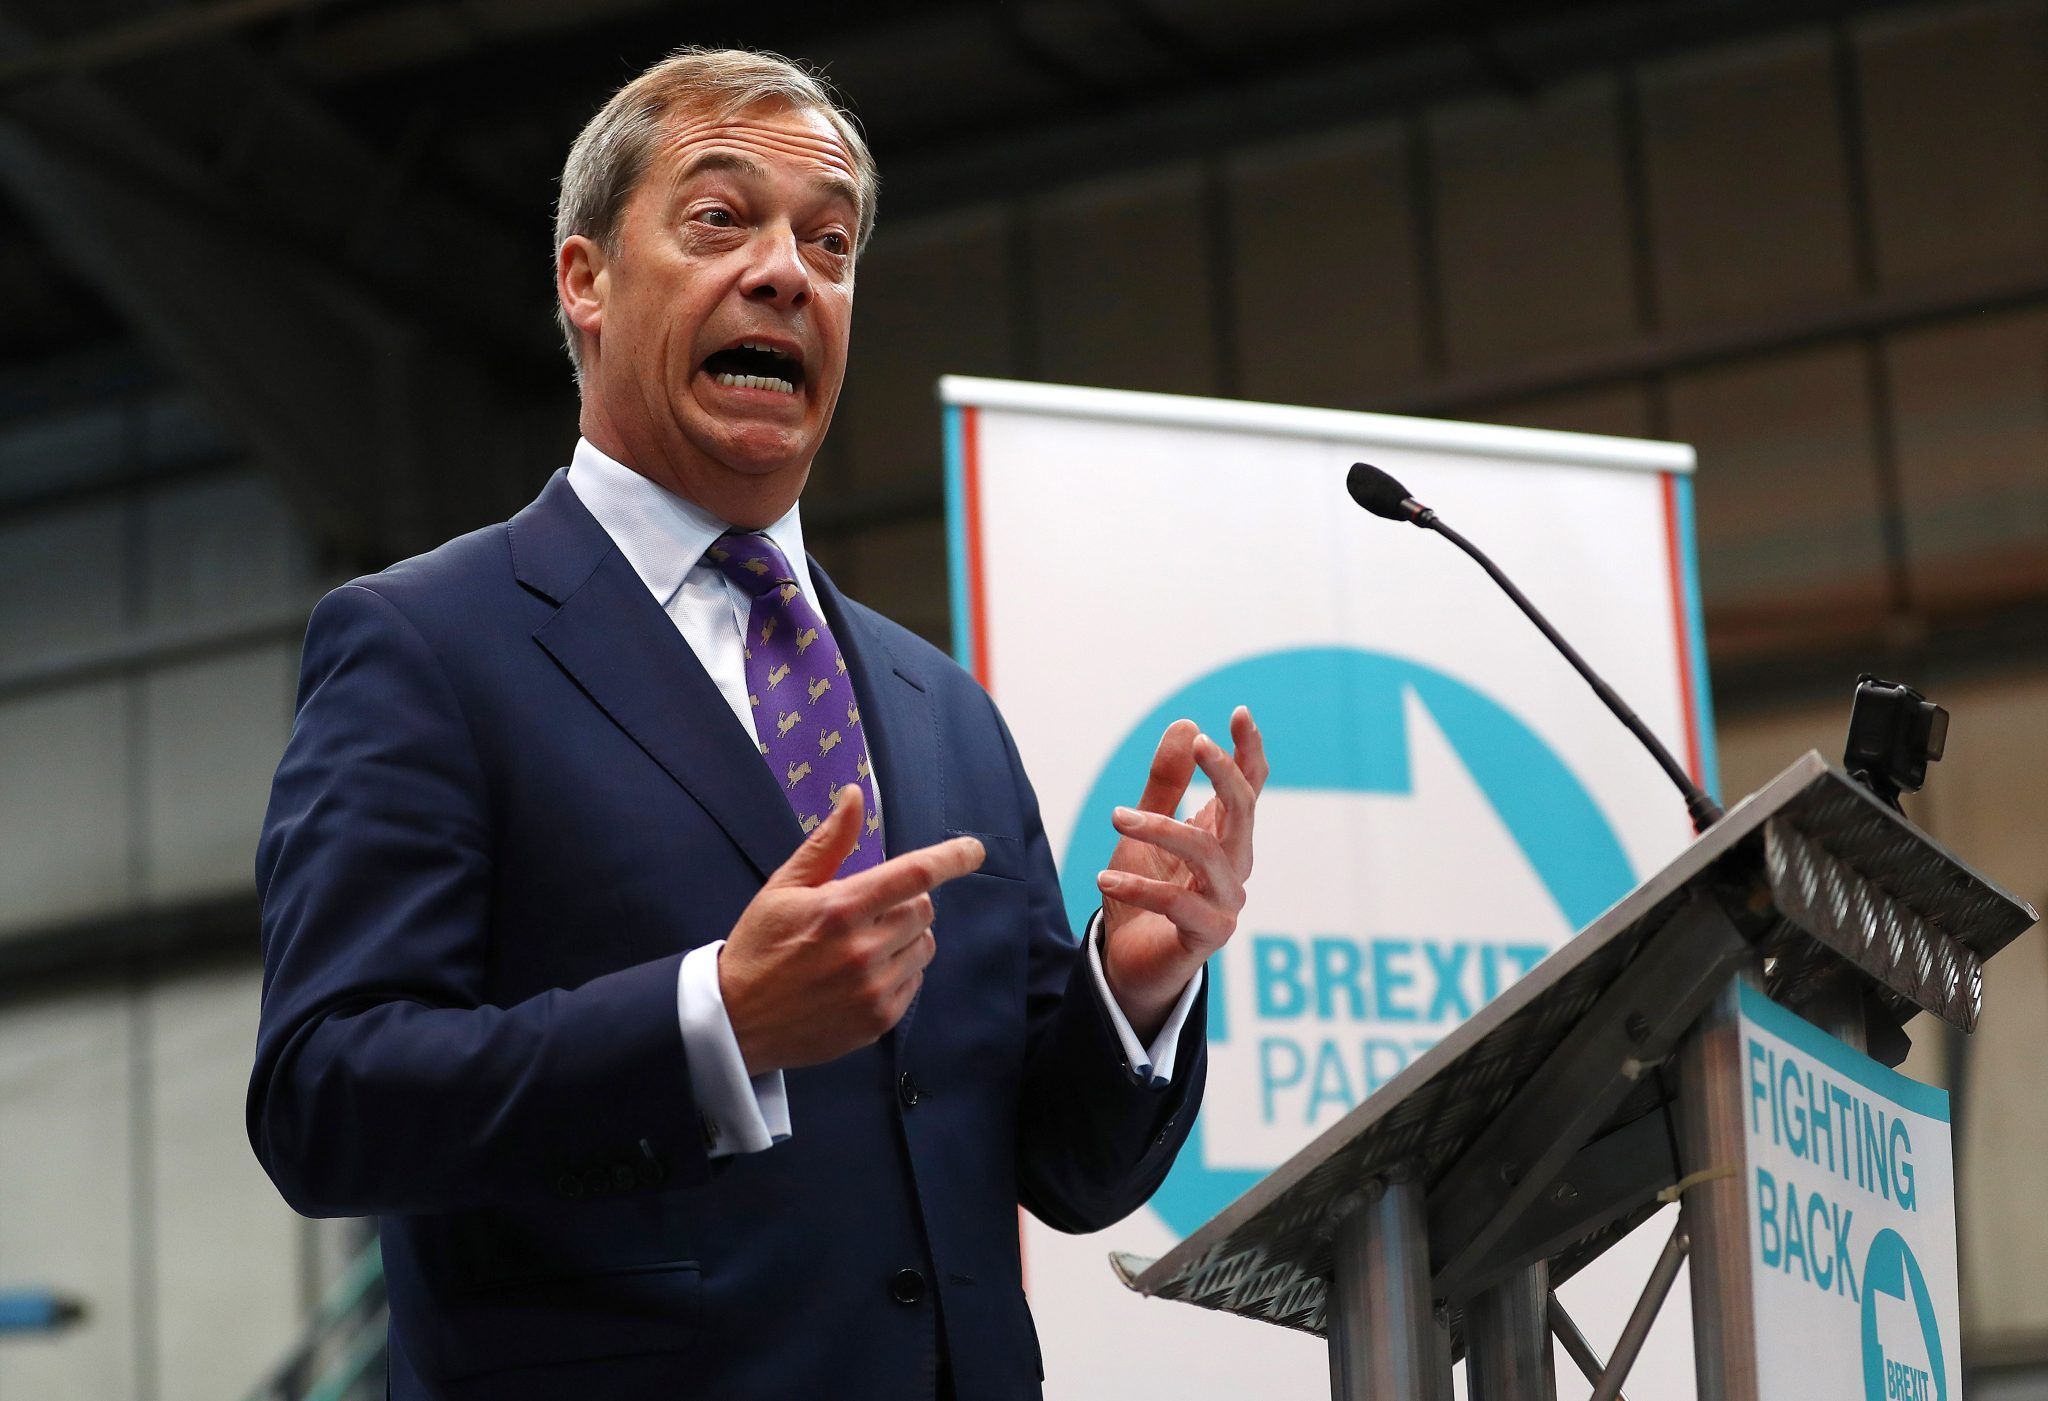 Nigel Farage has bet £1,000 that his Brexit party will secure the most seats (at the European elections Credit: Matthew Lewis)